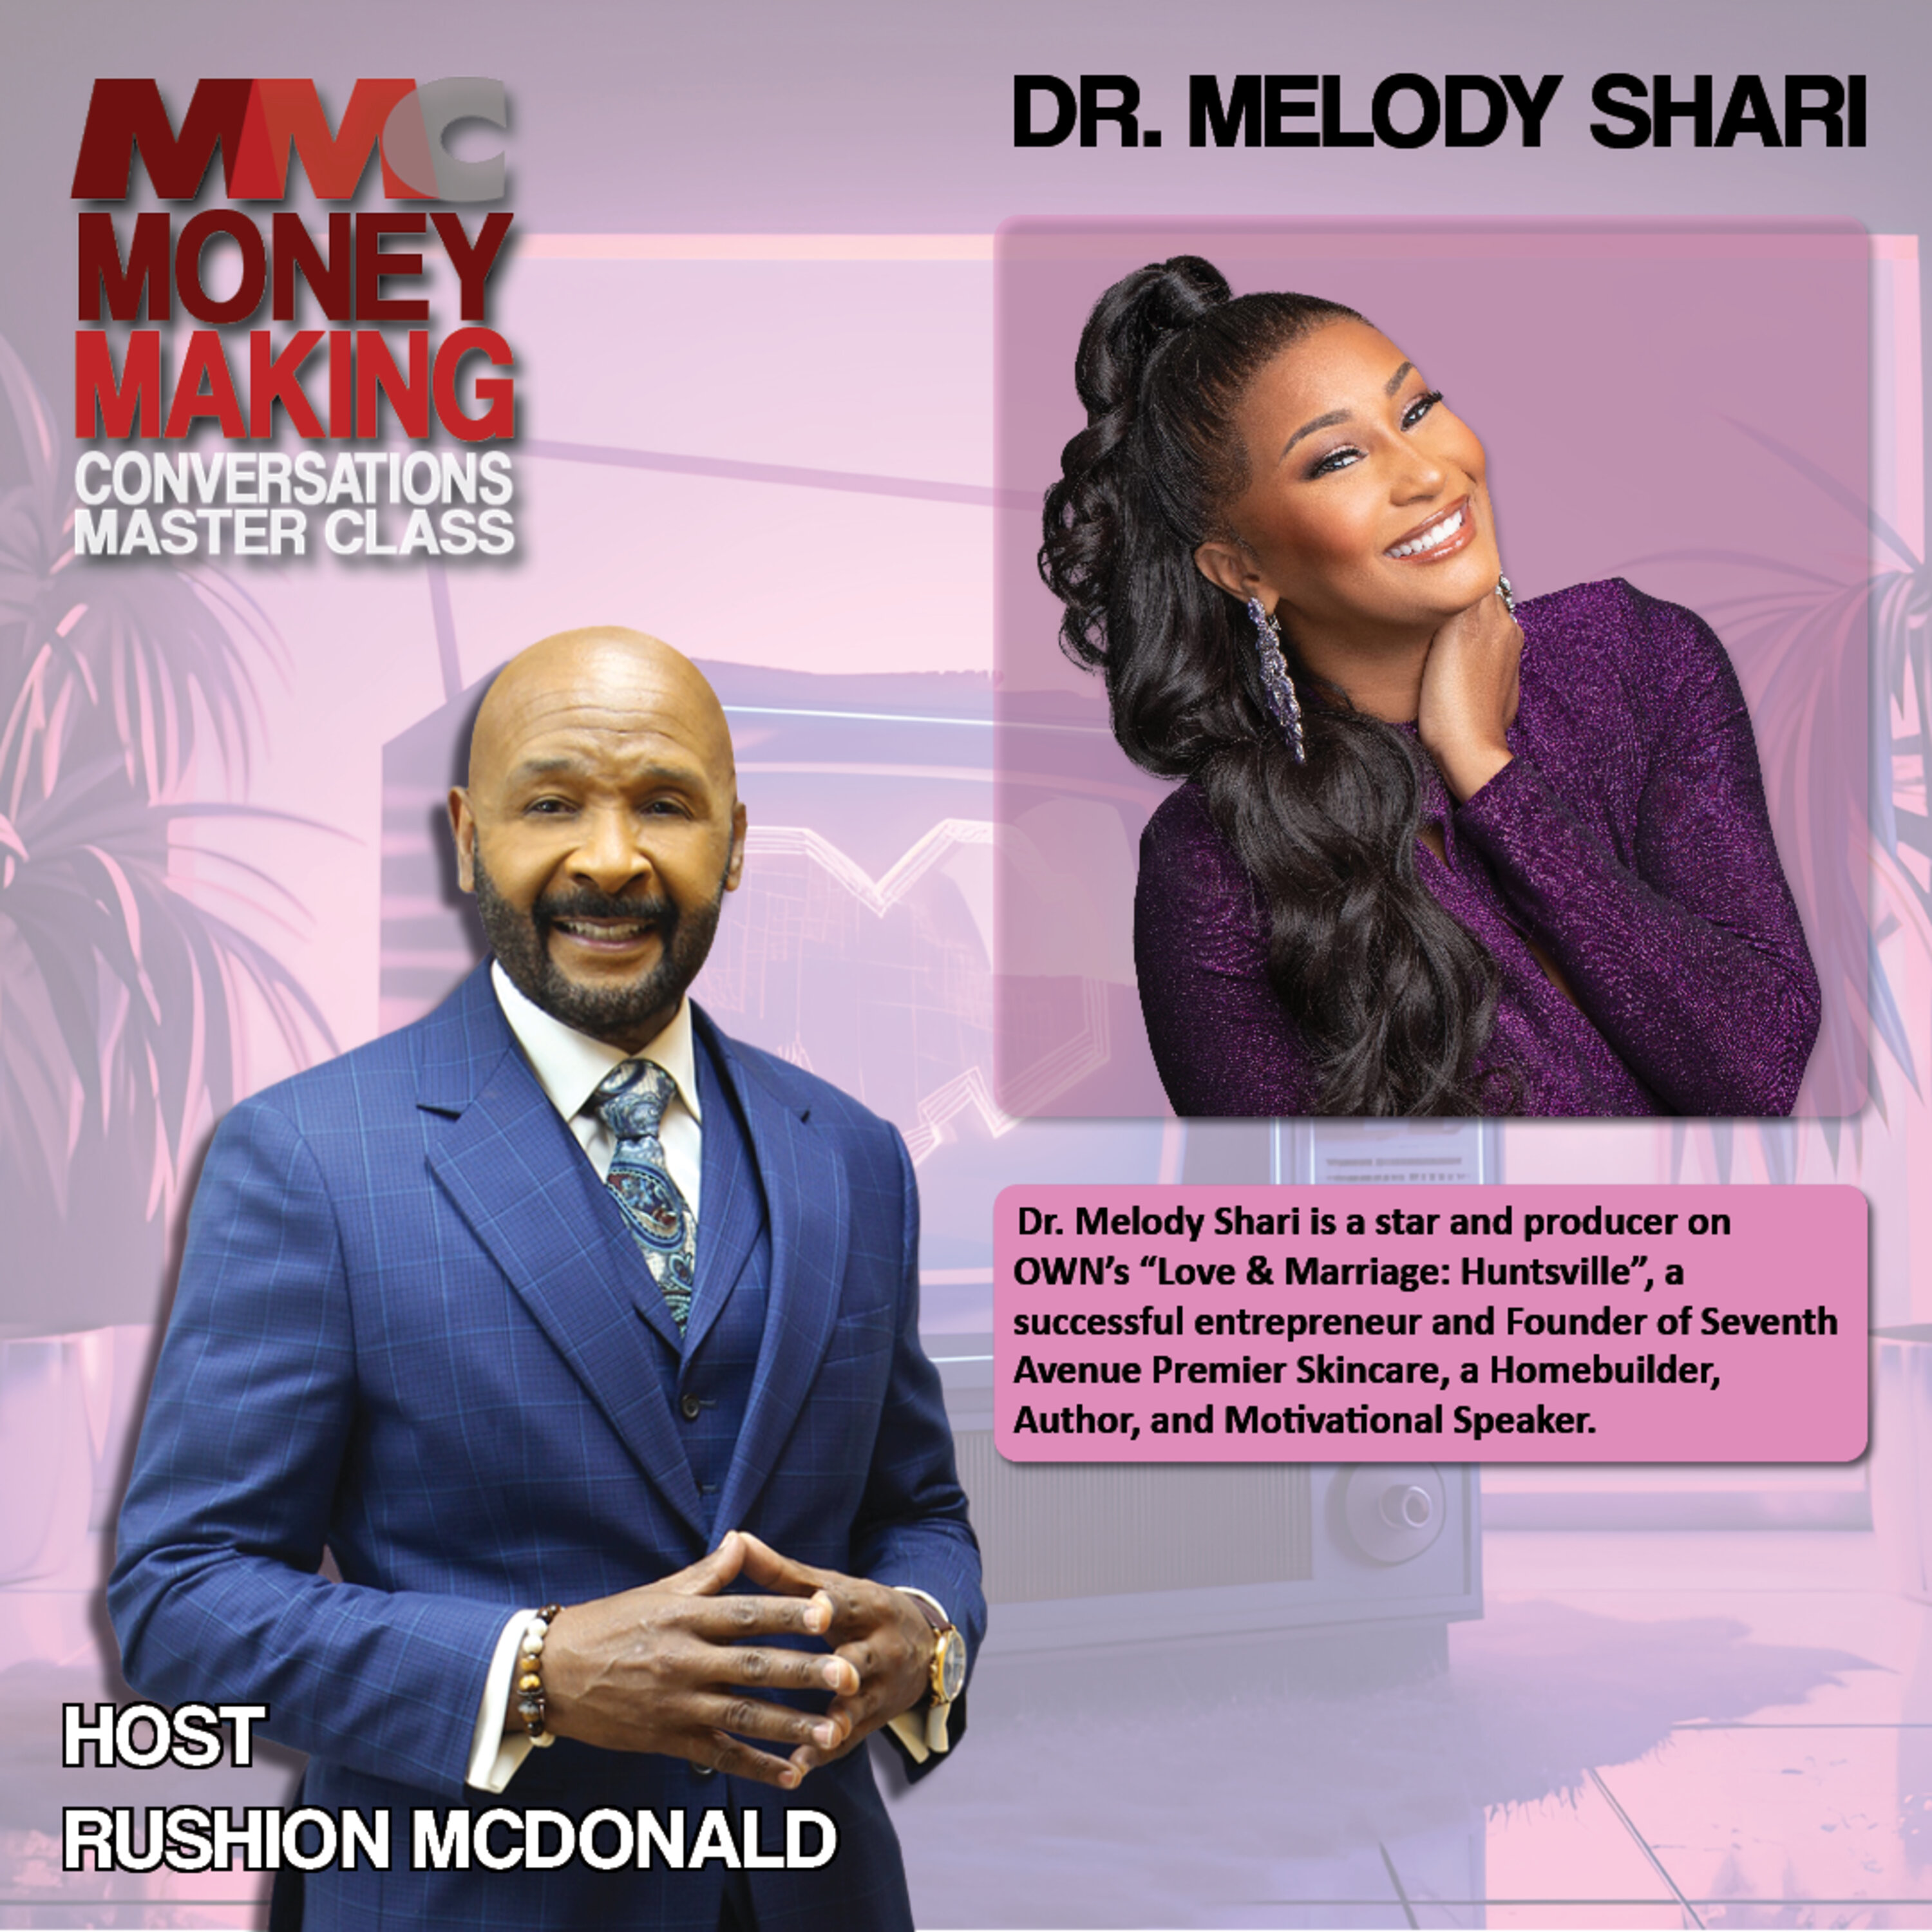 Dream marriage ended in divorce but did not stop her from becoming a successful entrepreneur says Dr. Melody Shari star of OWN’s “Love & Marriage: Huntsville.”